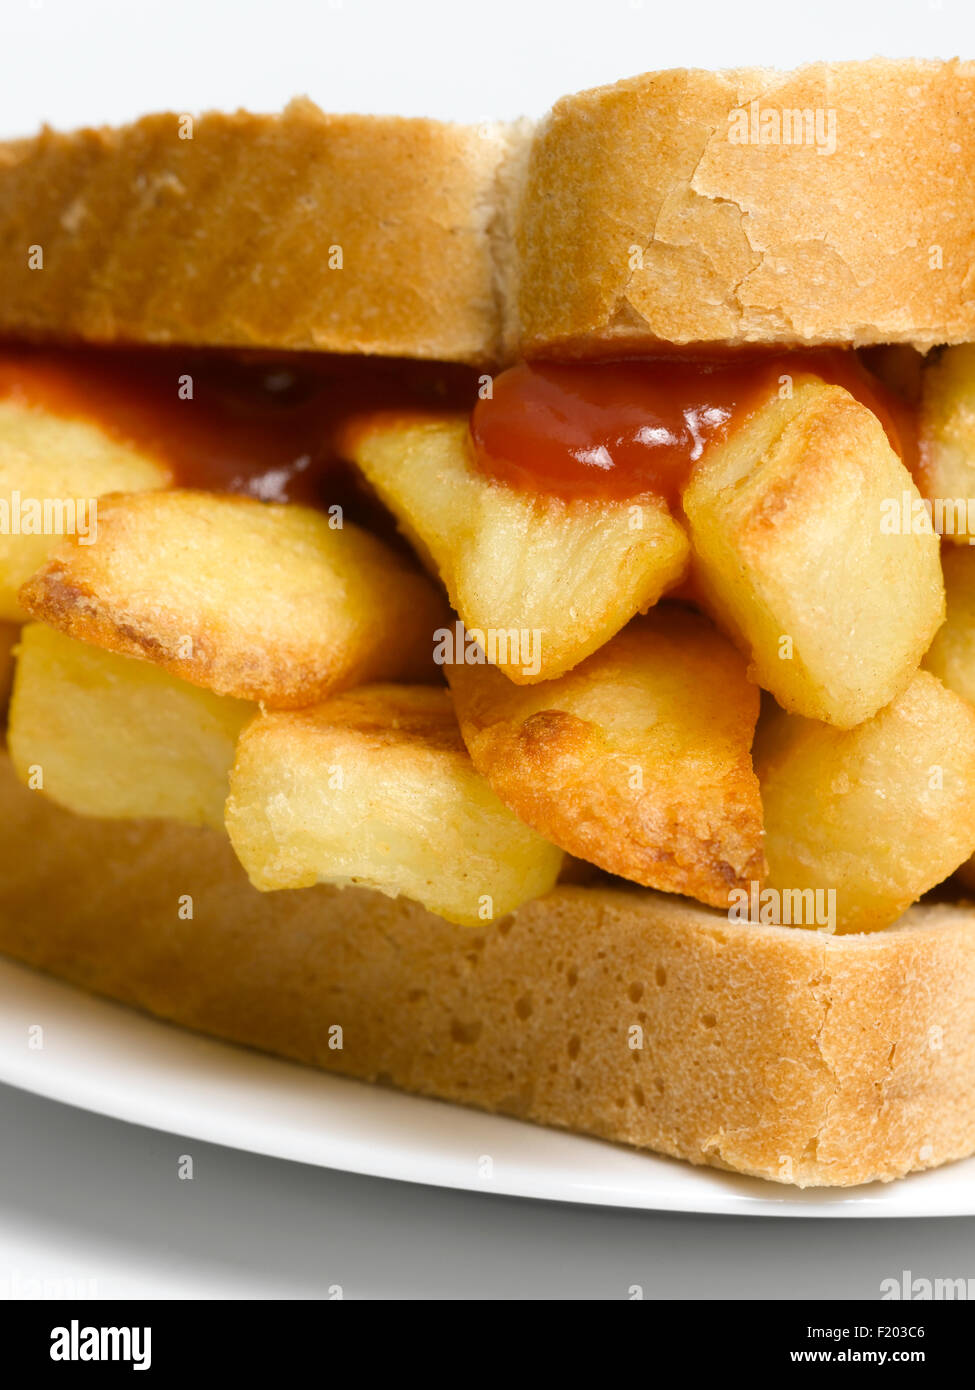 Chip Sandwich on a plate isolated Stock Photo